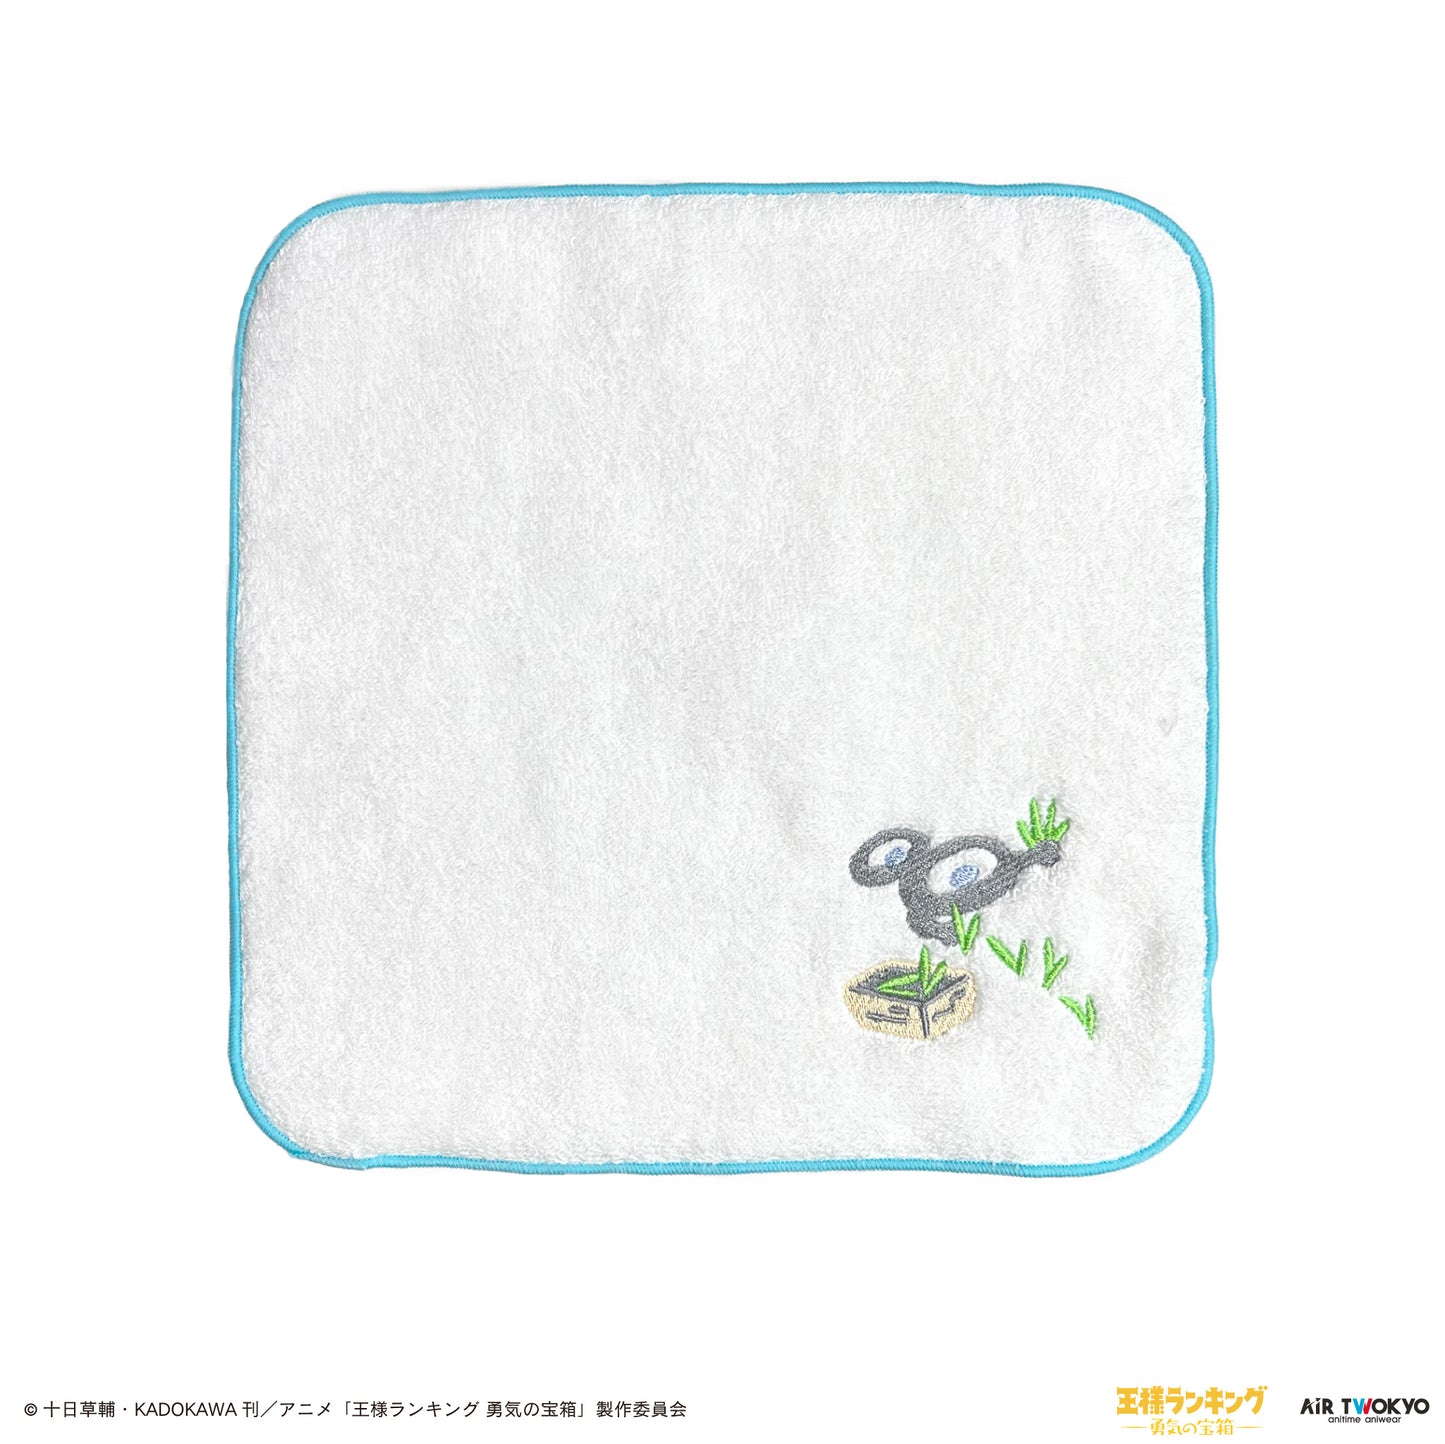 “Ranking of Kings: The Treasure Chest of Courage” character embroidered hand towel